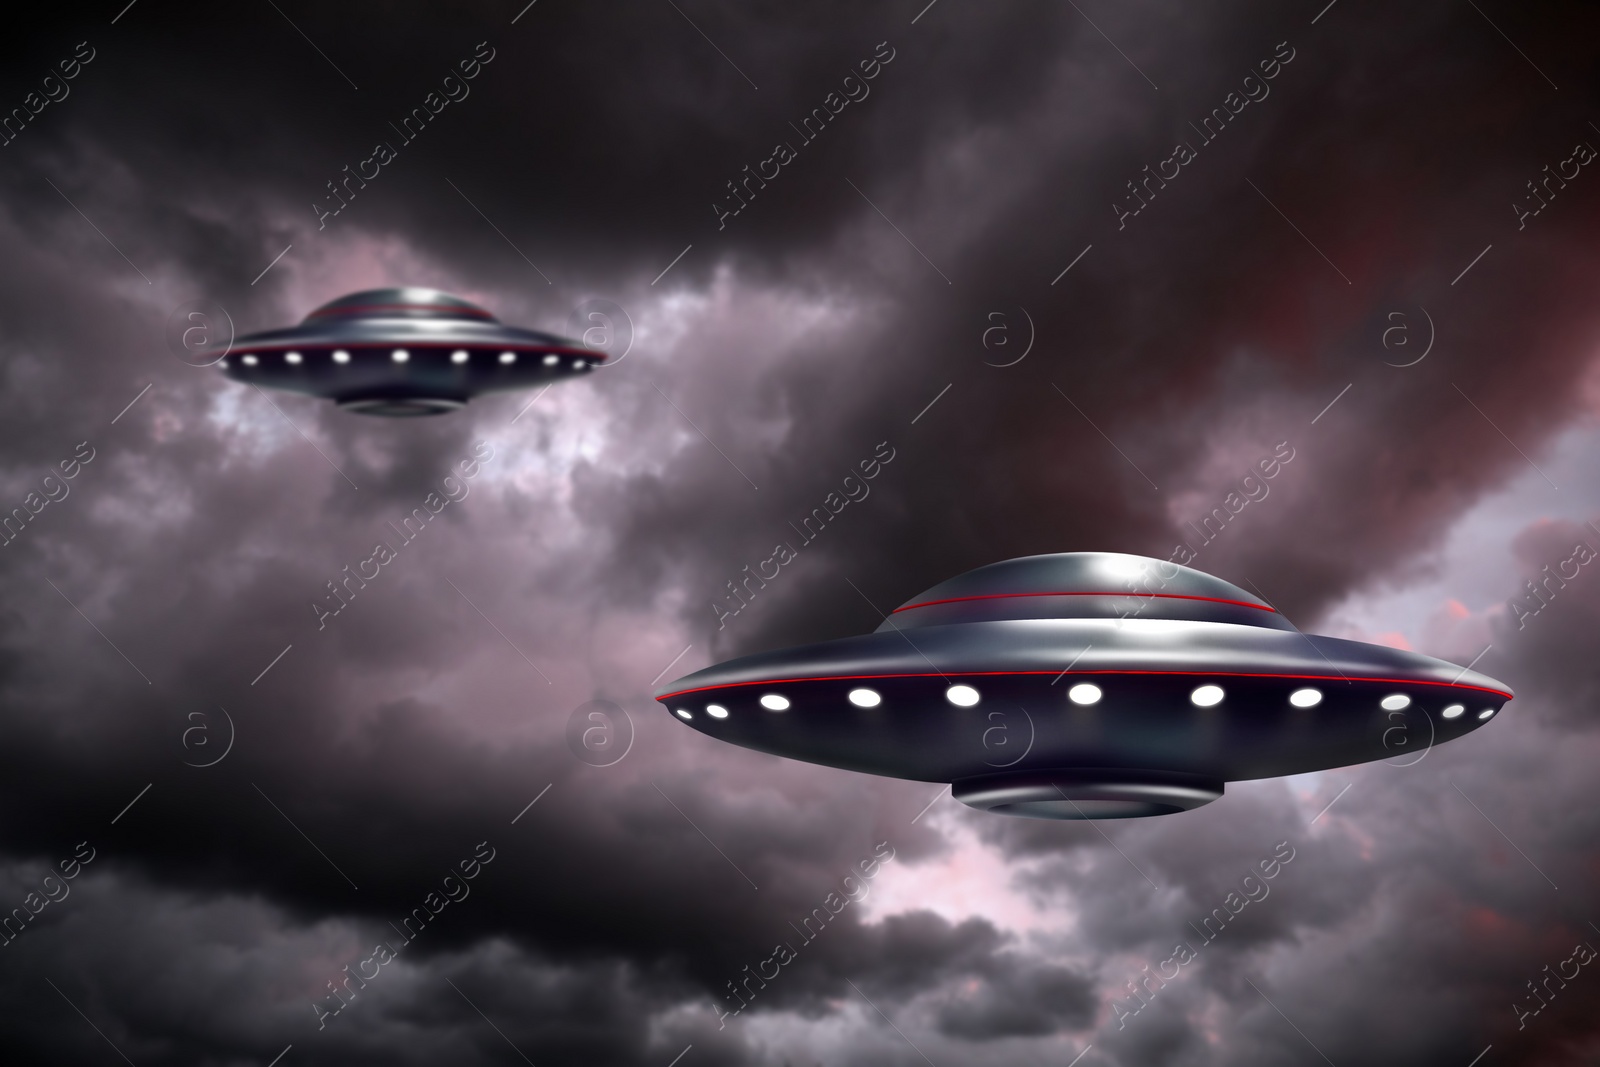 Image of UFO. Alien spaceships among clouds in sky. Extraterrestrial visitors